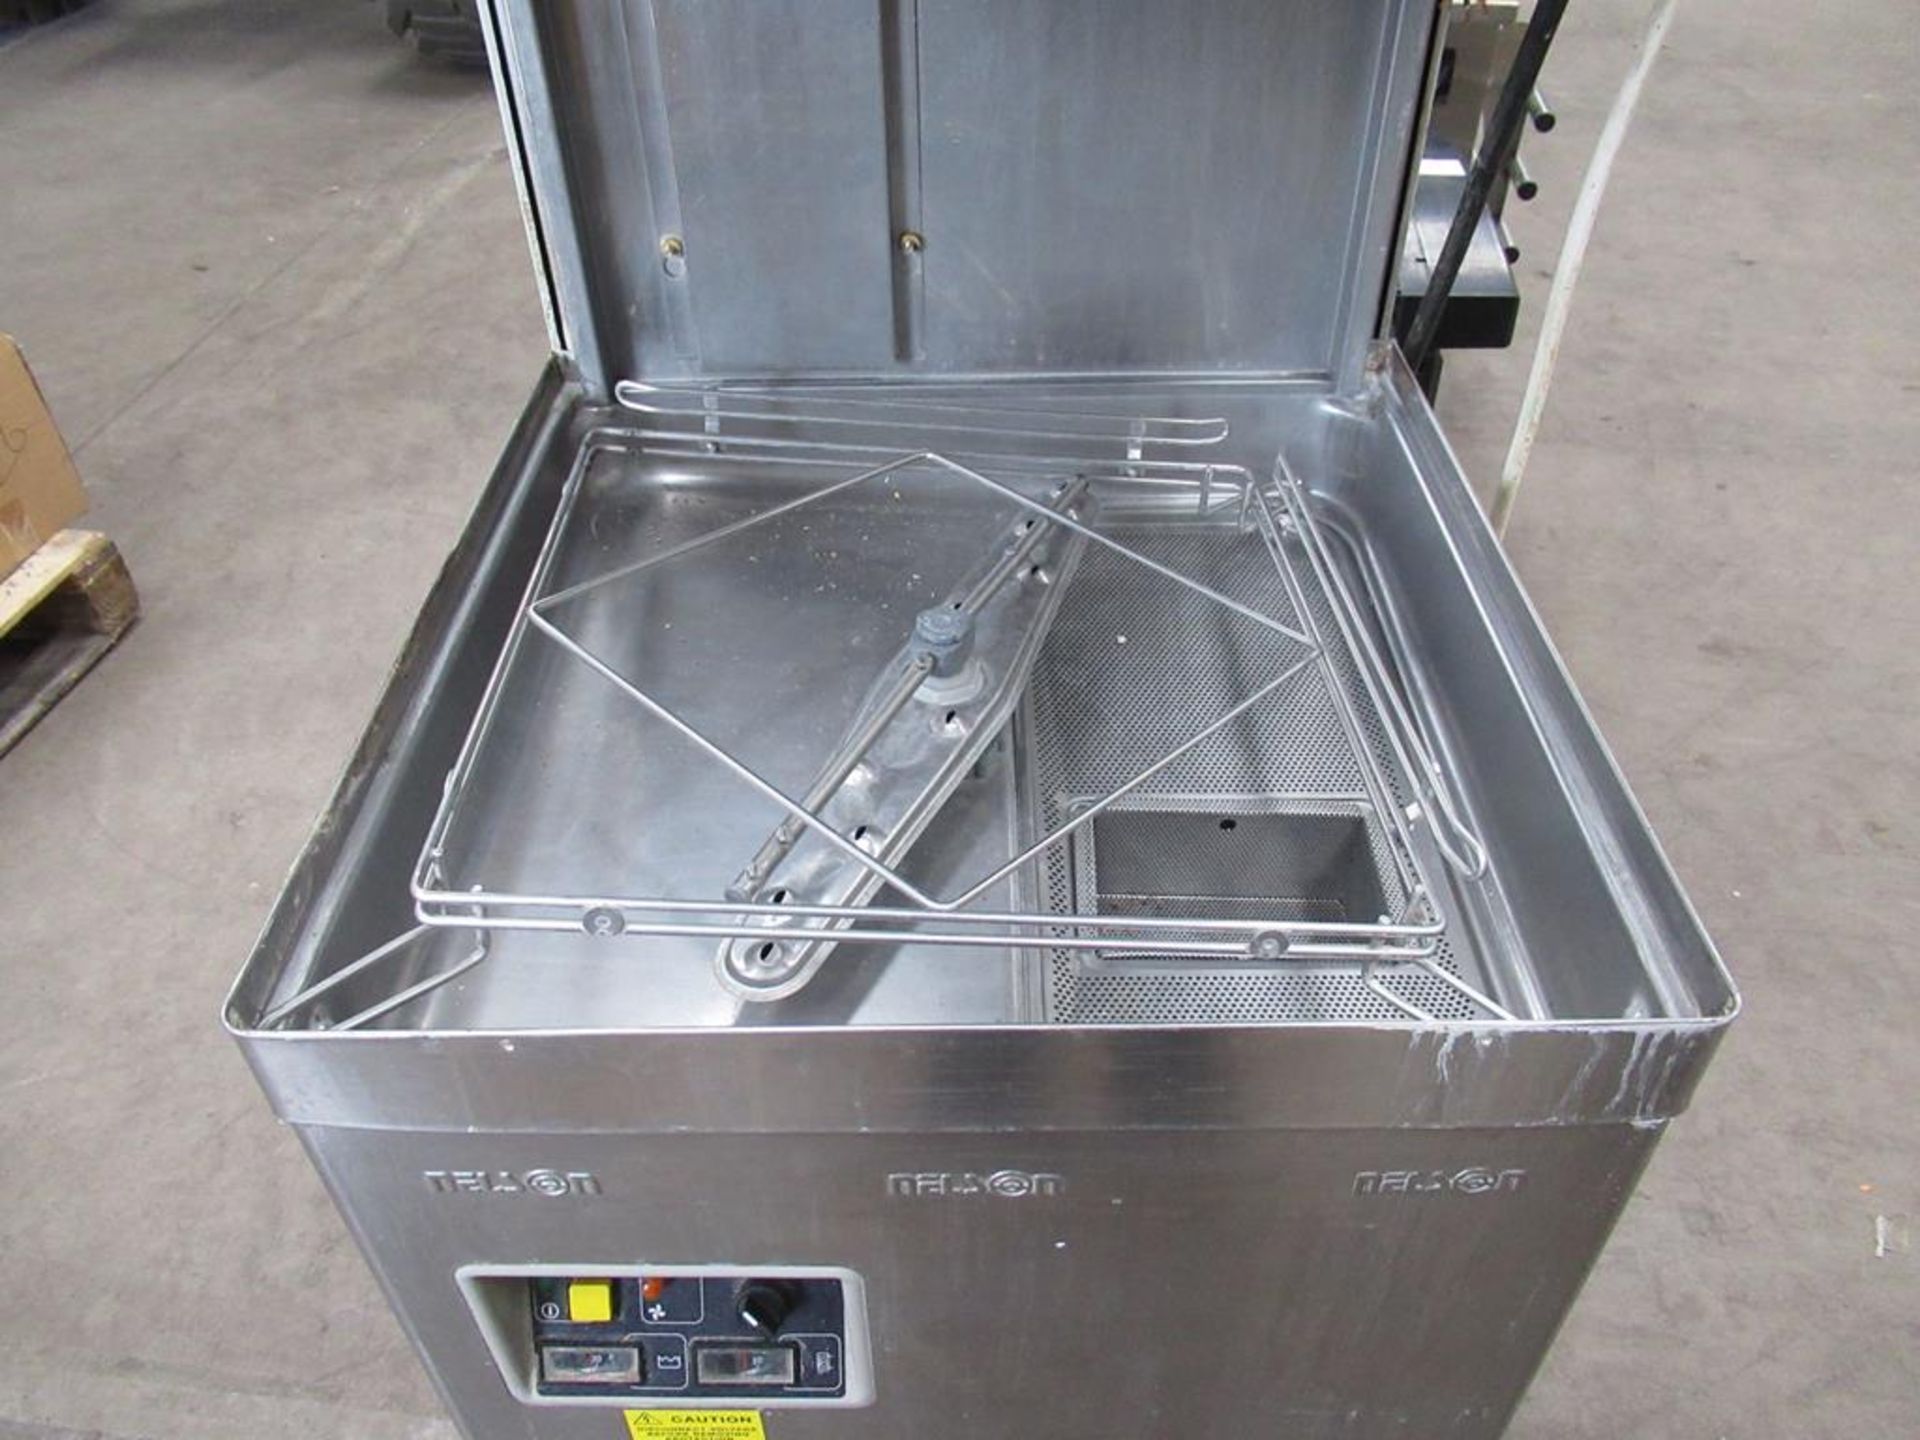 Nelson stainless steel dishwasher - Image 2 of 2